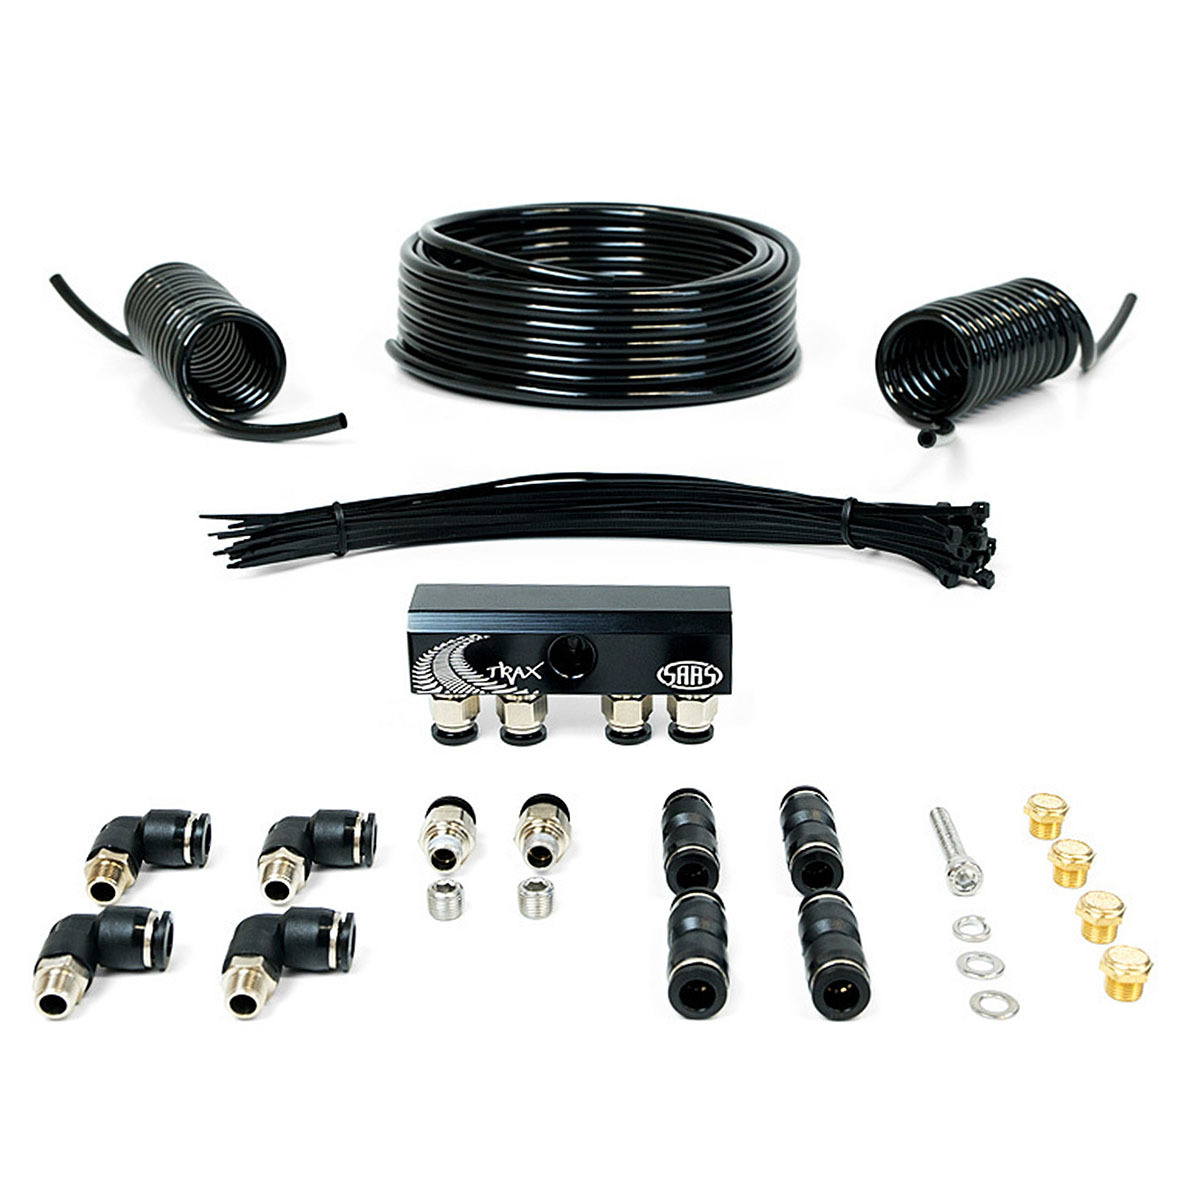 Diff Breather Kit 4 Port suit TOYOTA HILUX 2016 > All Models